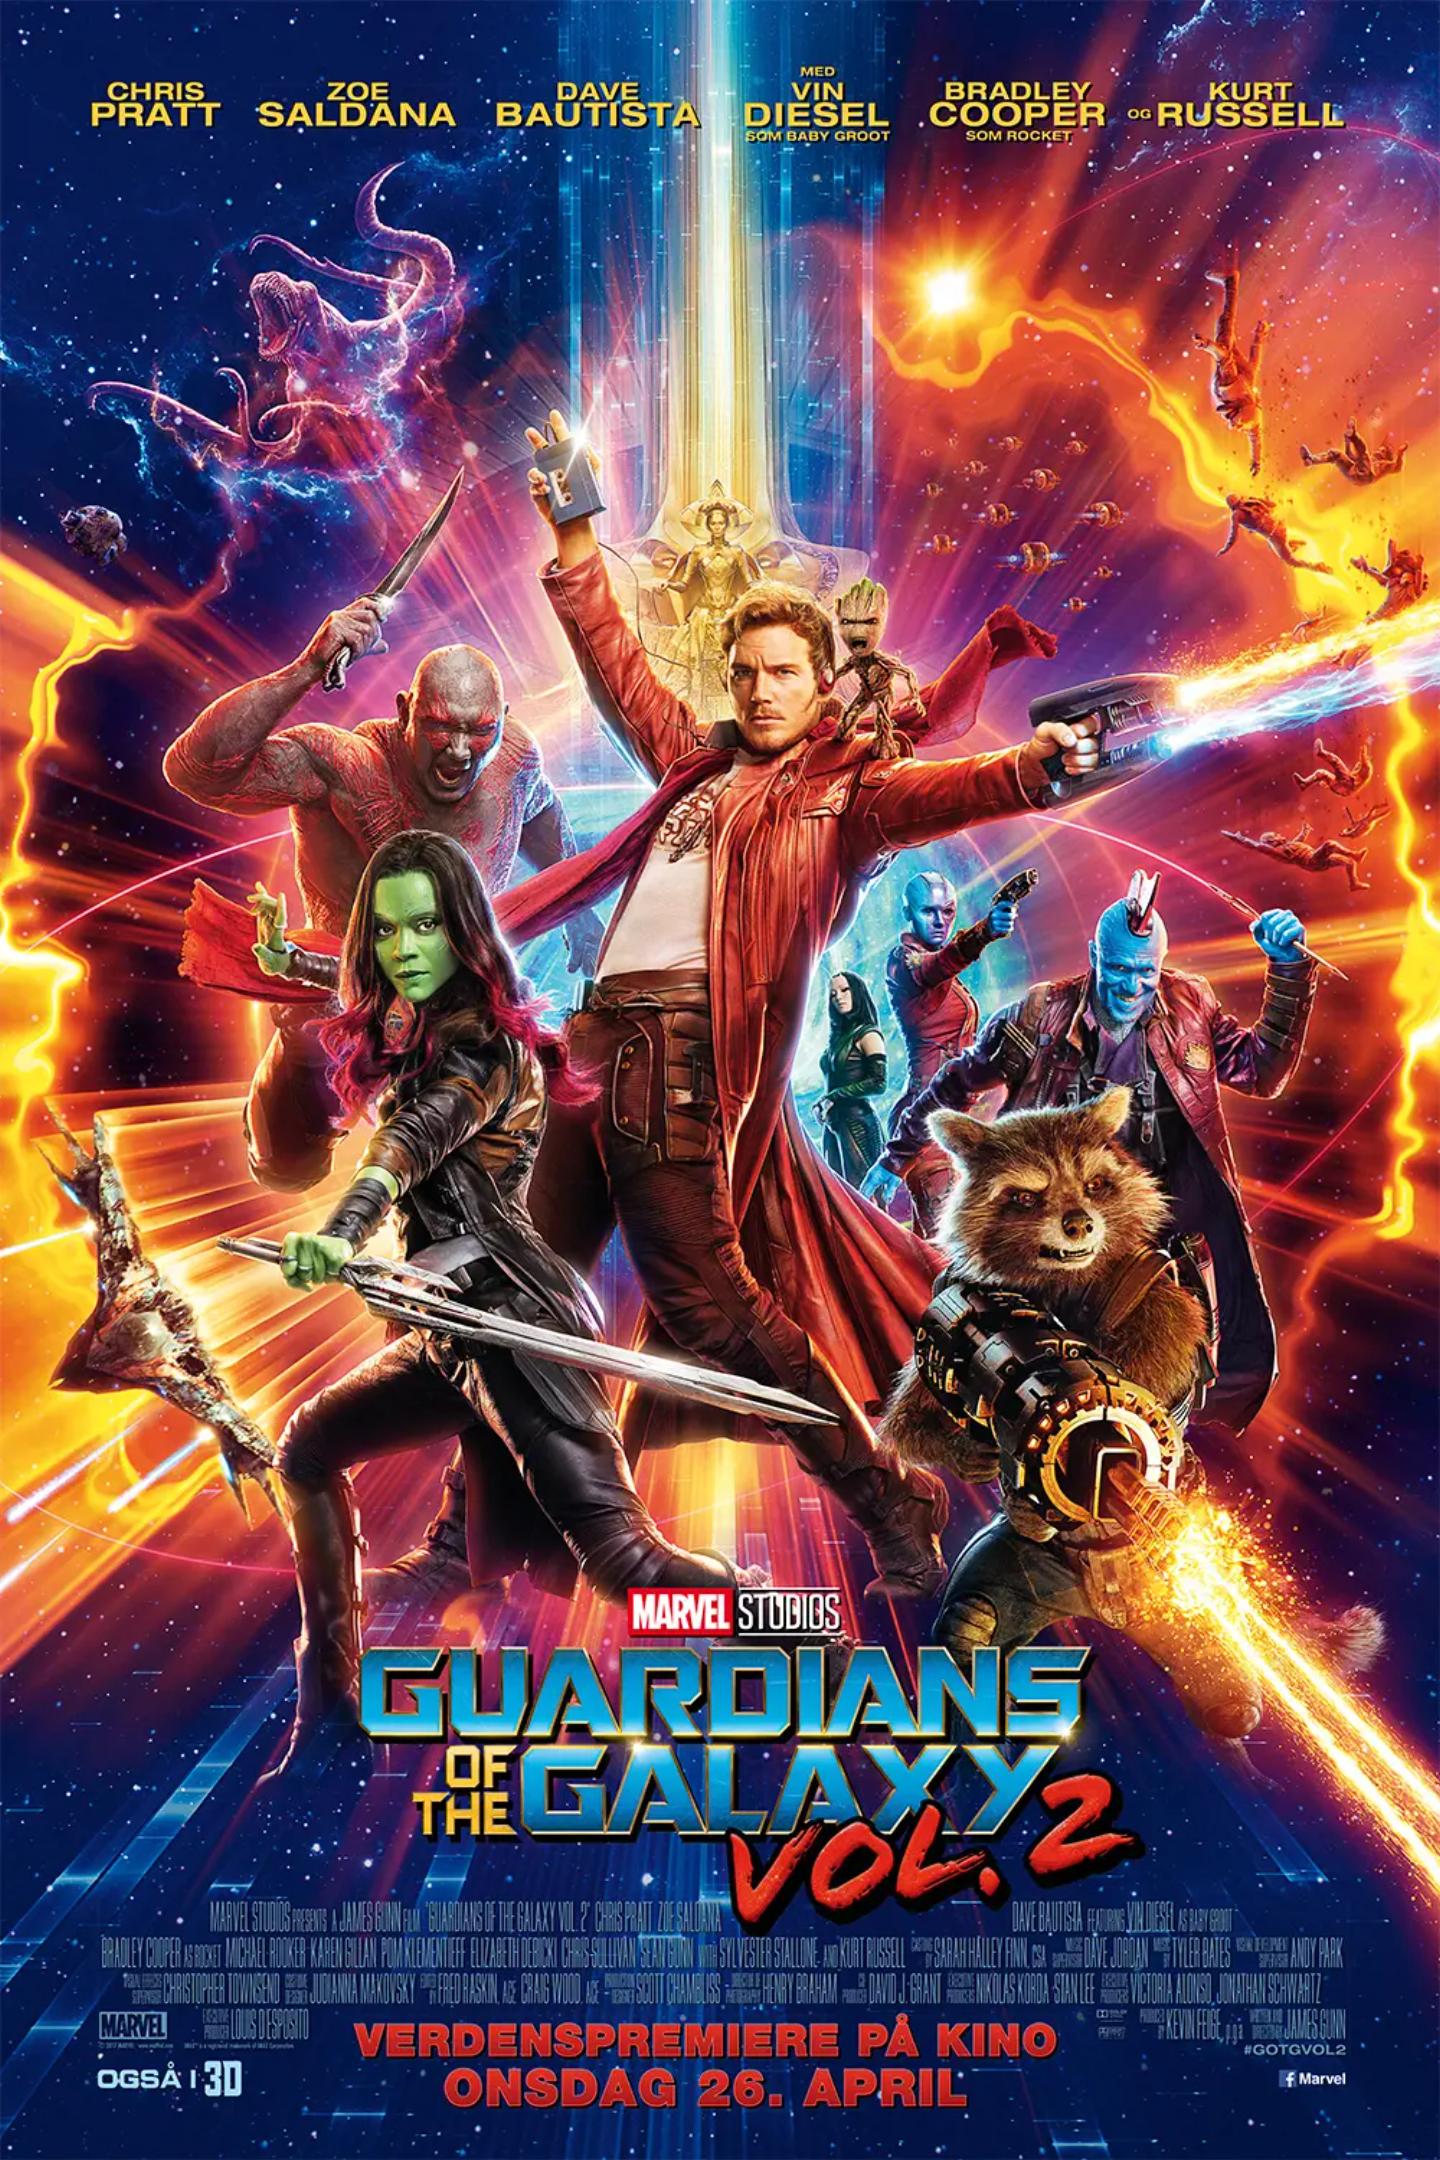 Plakat for 'Guardians of the Galaxy Vol. 2'